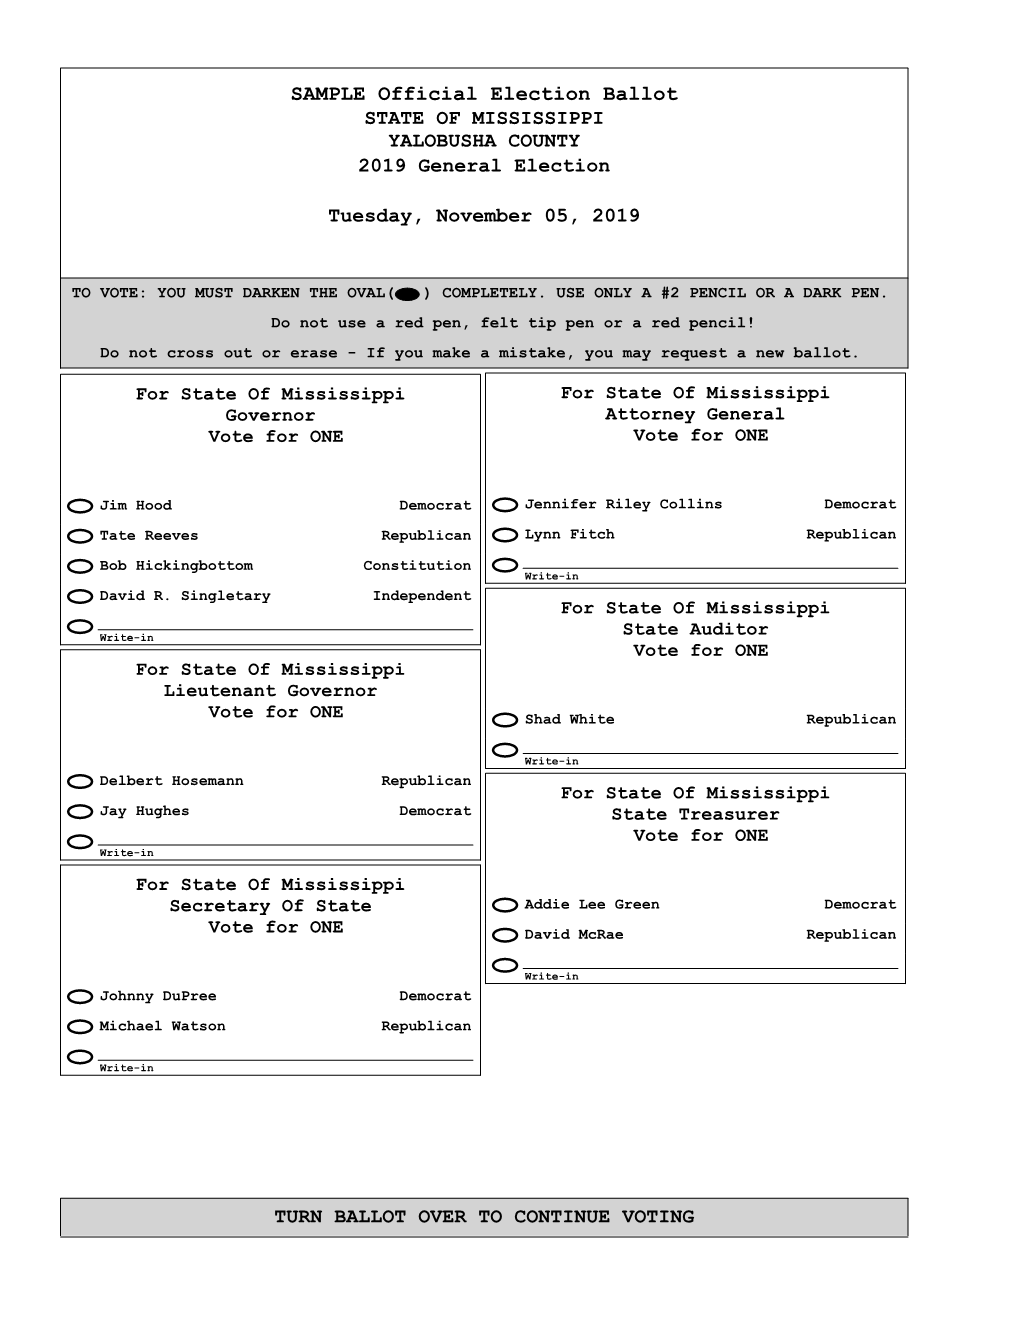 SAMPLE Official Election Ballot STATE of MISSISSIPPI YALOBUSHA COUNTY 2019 General Election Tuesday, November 05, 2019 TURN BALL